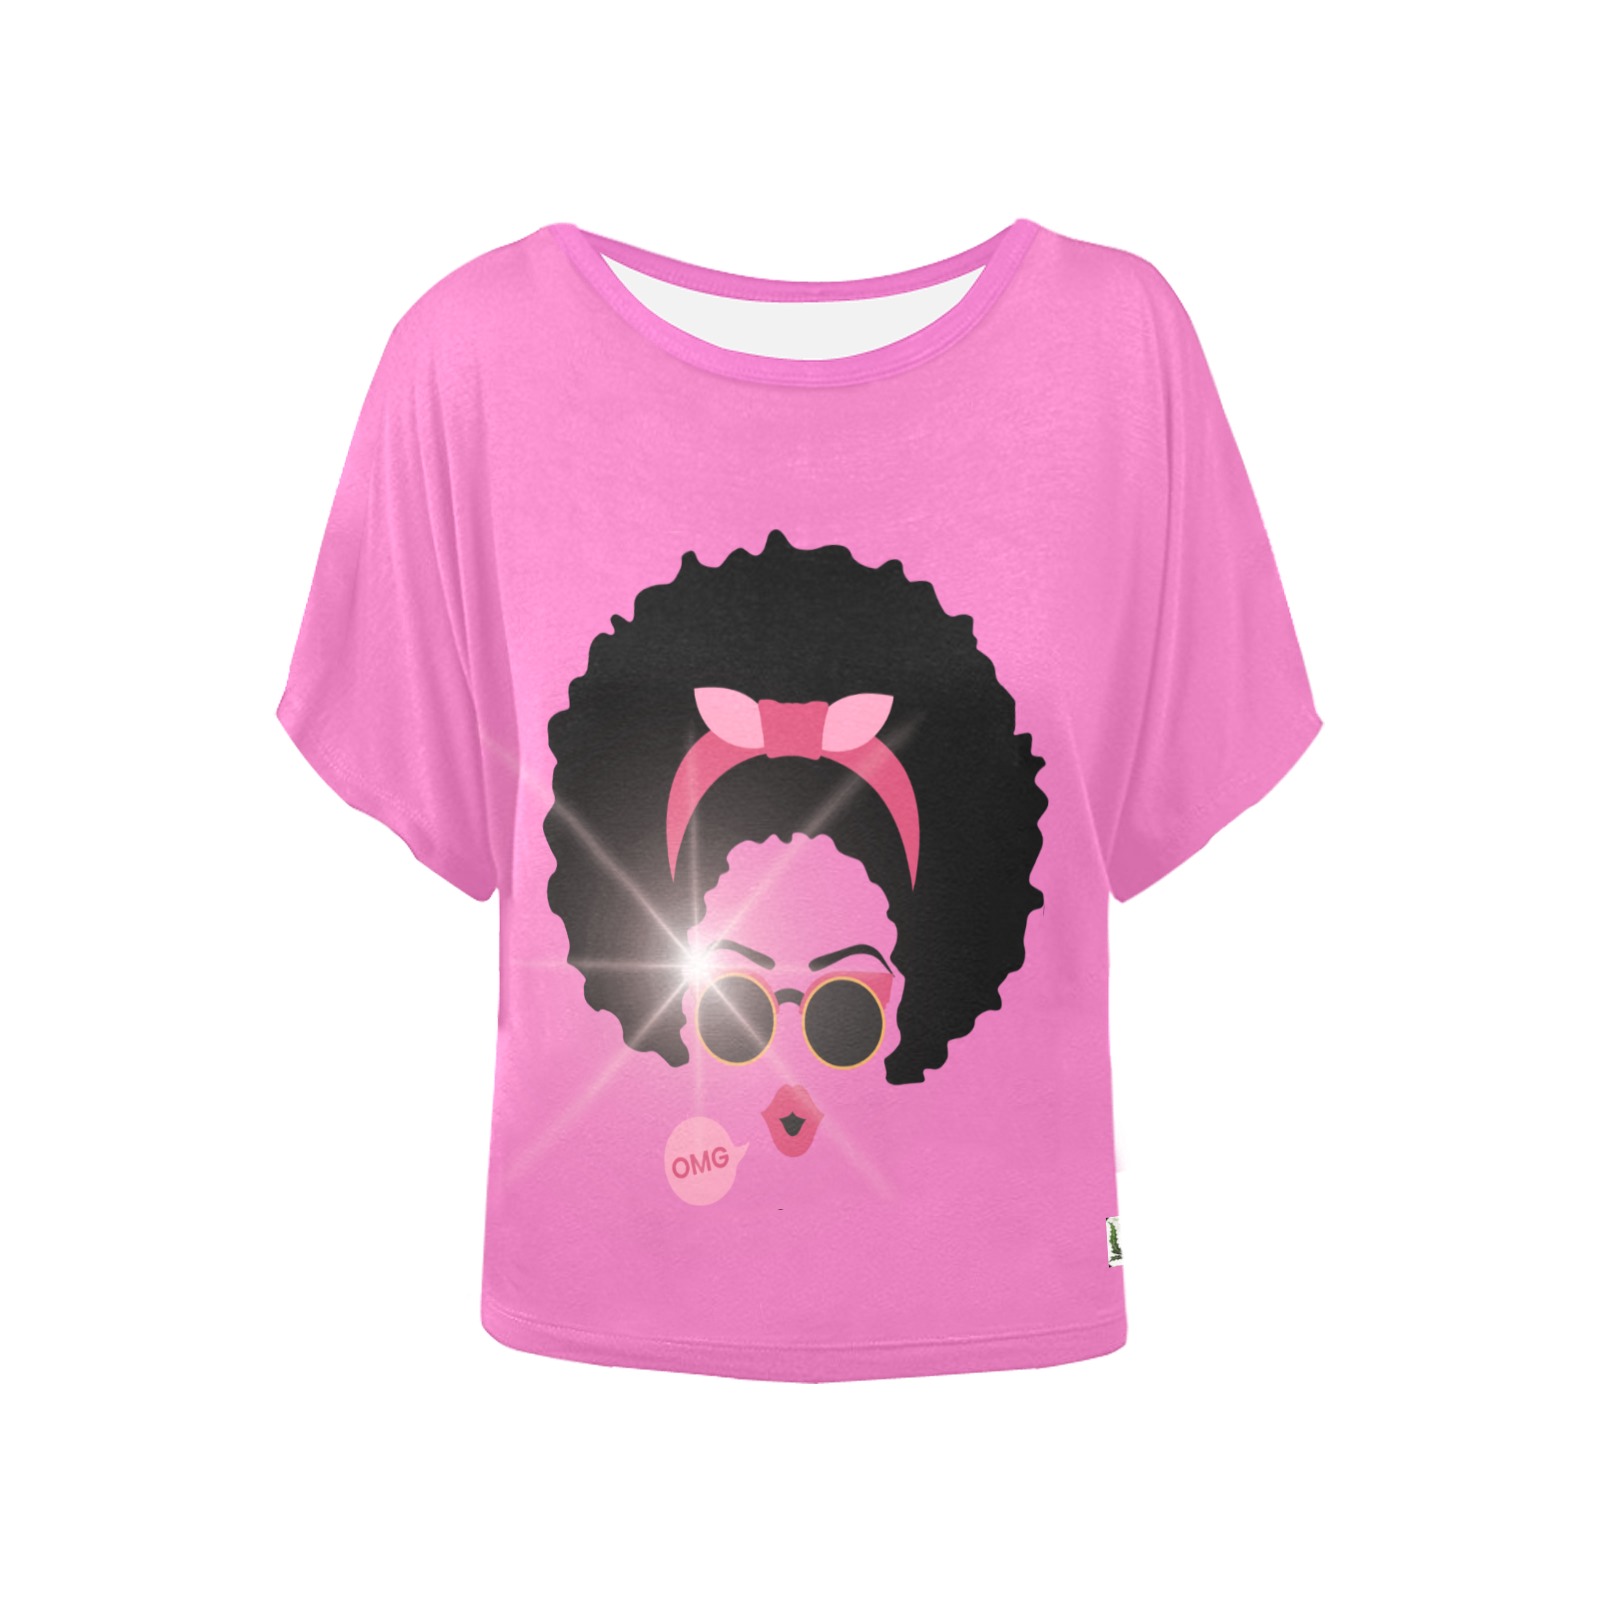 FD's Black is Beautiful Collection- Black Woman OMG in pink 53086 Women's Batwing-Sleeved Blouse T shirt (Model T44)